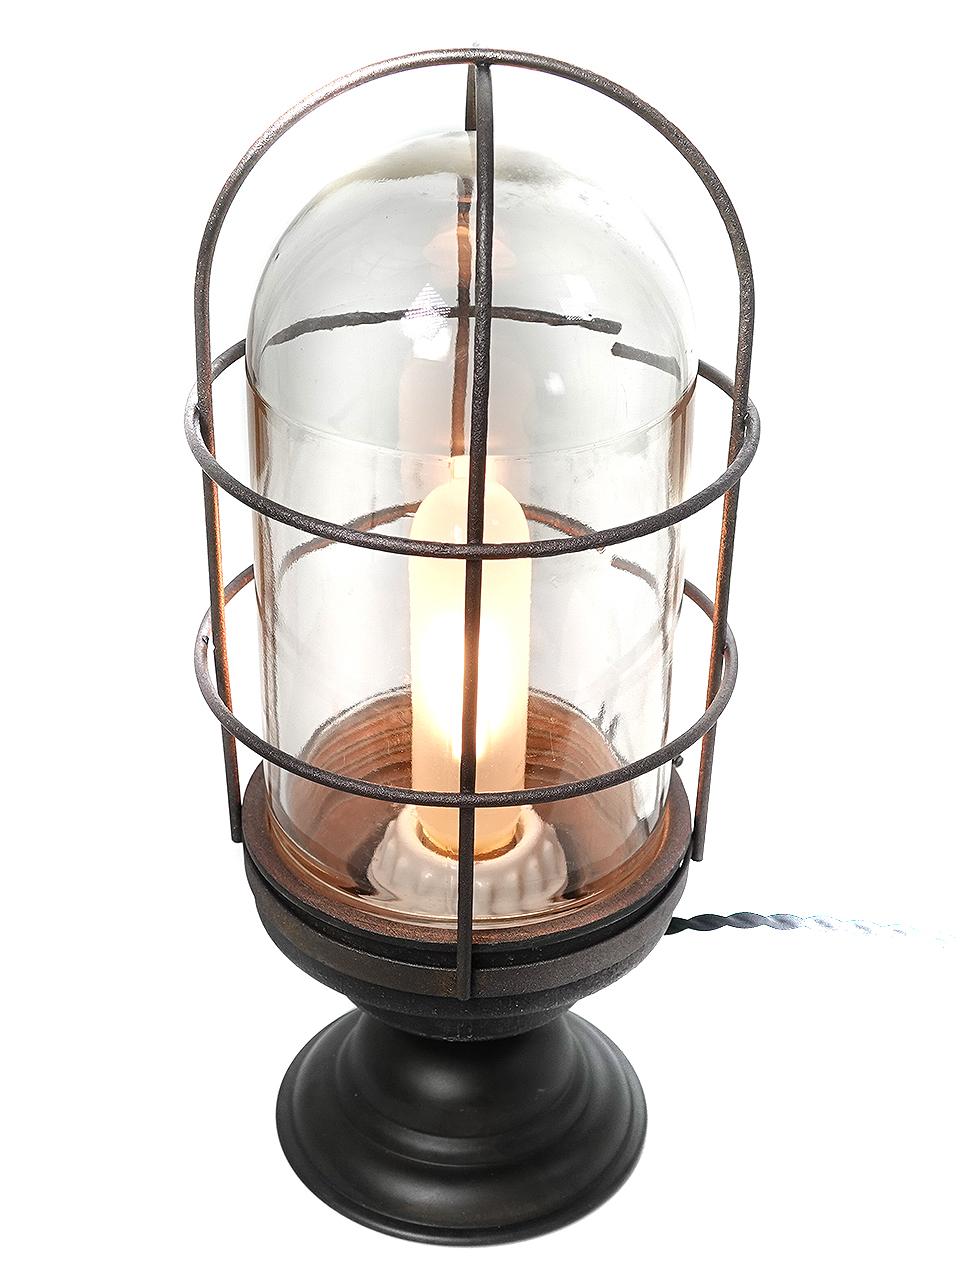 I see this pair as quintessential industrial table lighting. Originally they were the simplest of explosion proof fixtures. Now on a standing base, rewired with twisted fabric covered cord and wall plug they take on a whole new look. Priced and sold